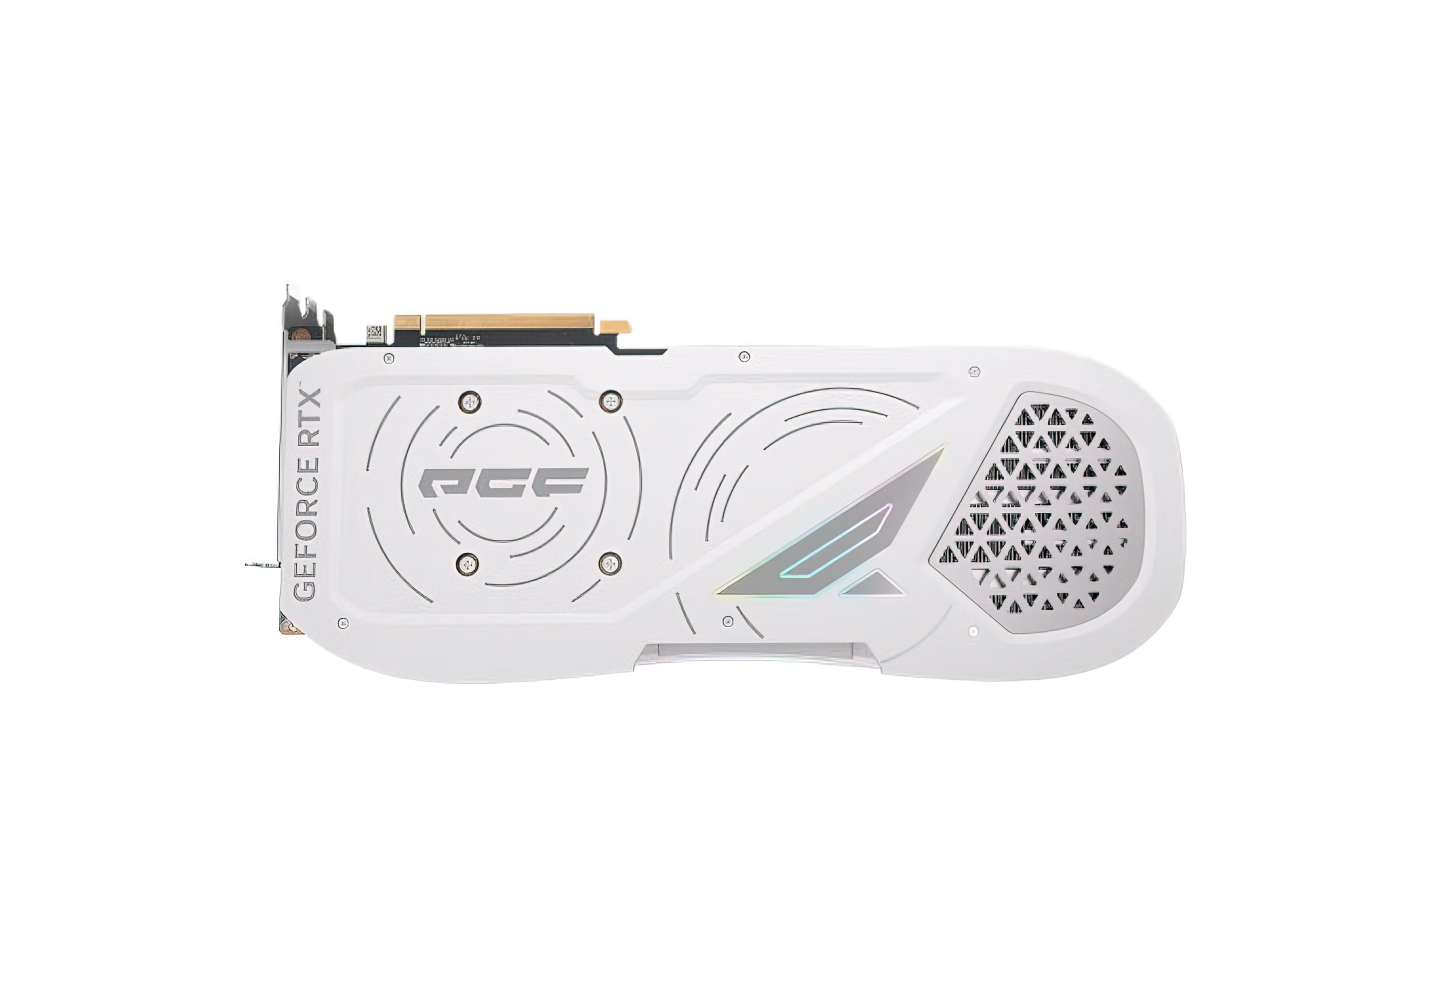 ZOTAC-GeForce-RTX-4090-PGF-Graphics-Card-_12-g-low_res-scale-2_00x-1456x986.png